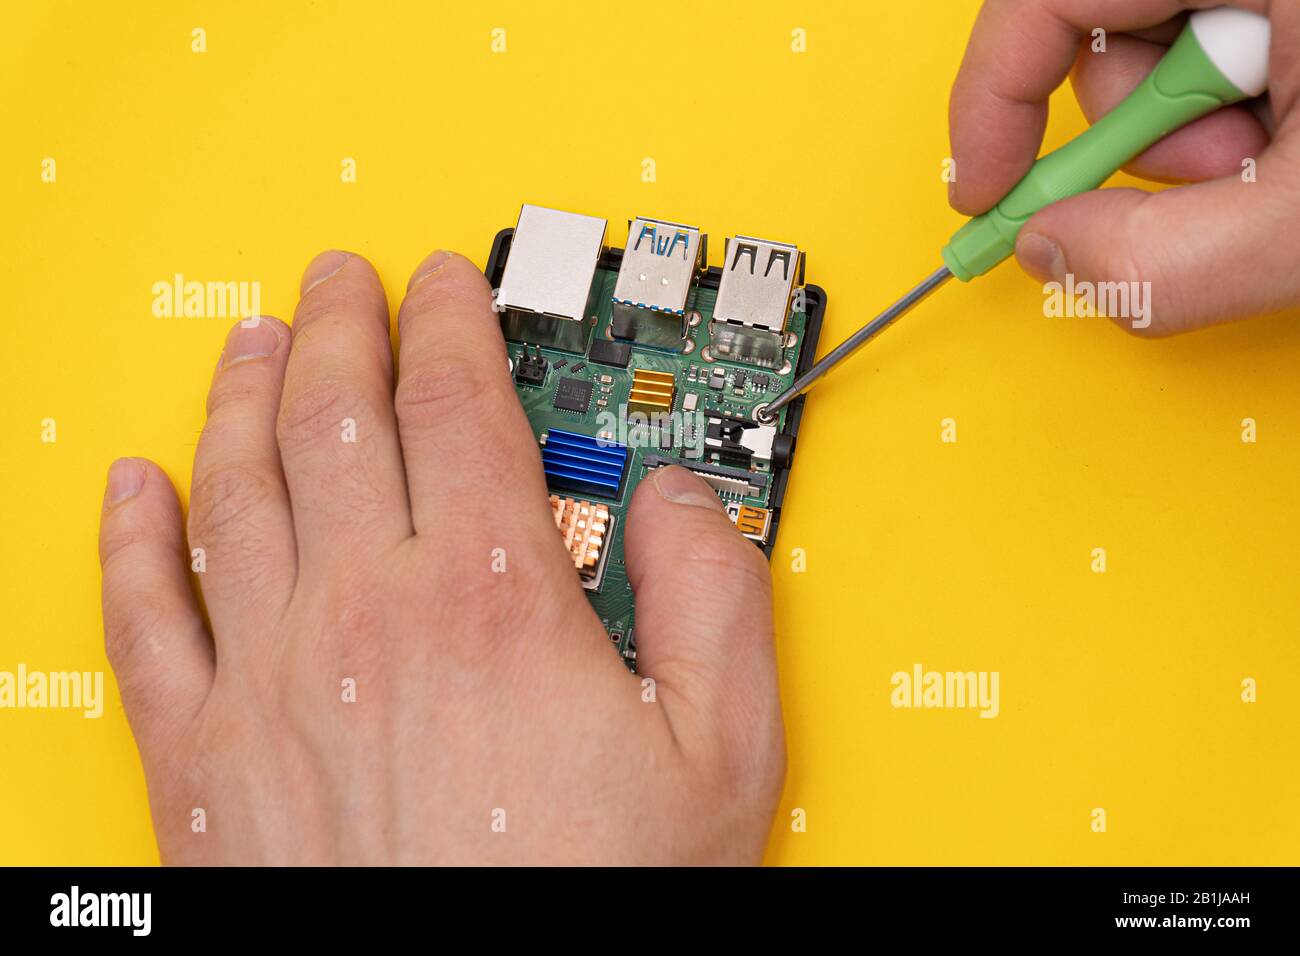 Man fixes microcomputer with screwdriver Stock Photo